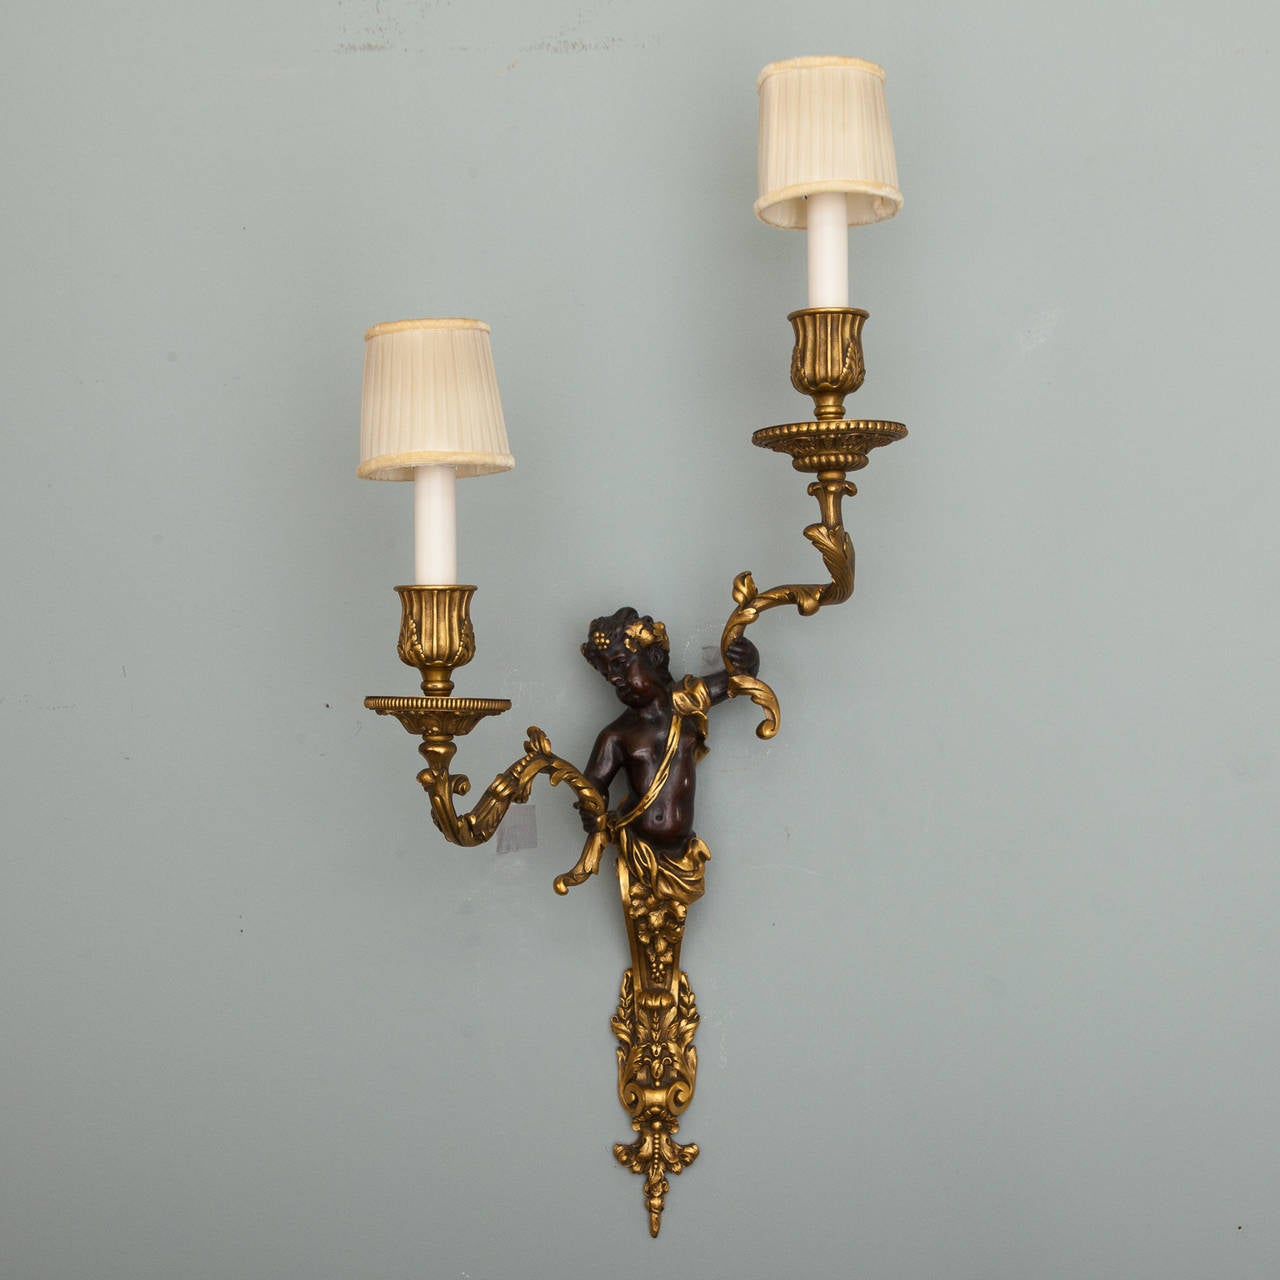 Circa 1900 pair of European bronze sconces with dark bronze puti and gilded bronze candle arms. New wiring for US electrical standards.